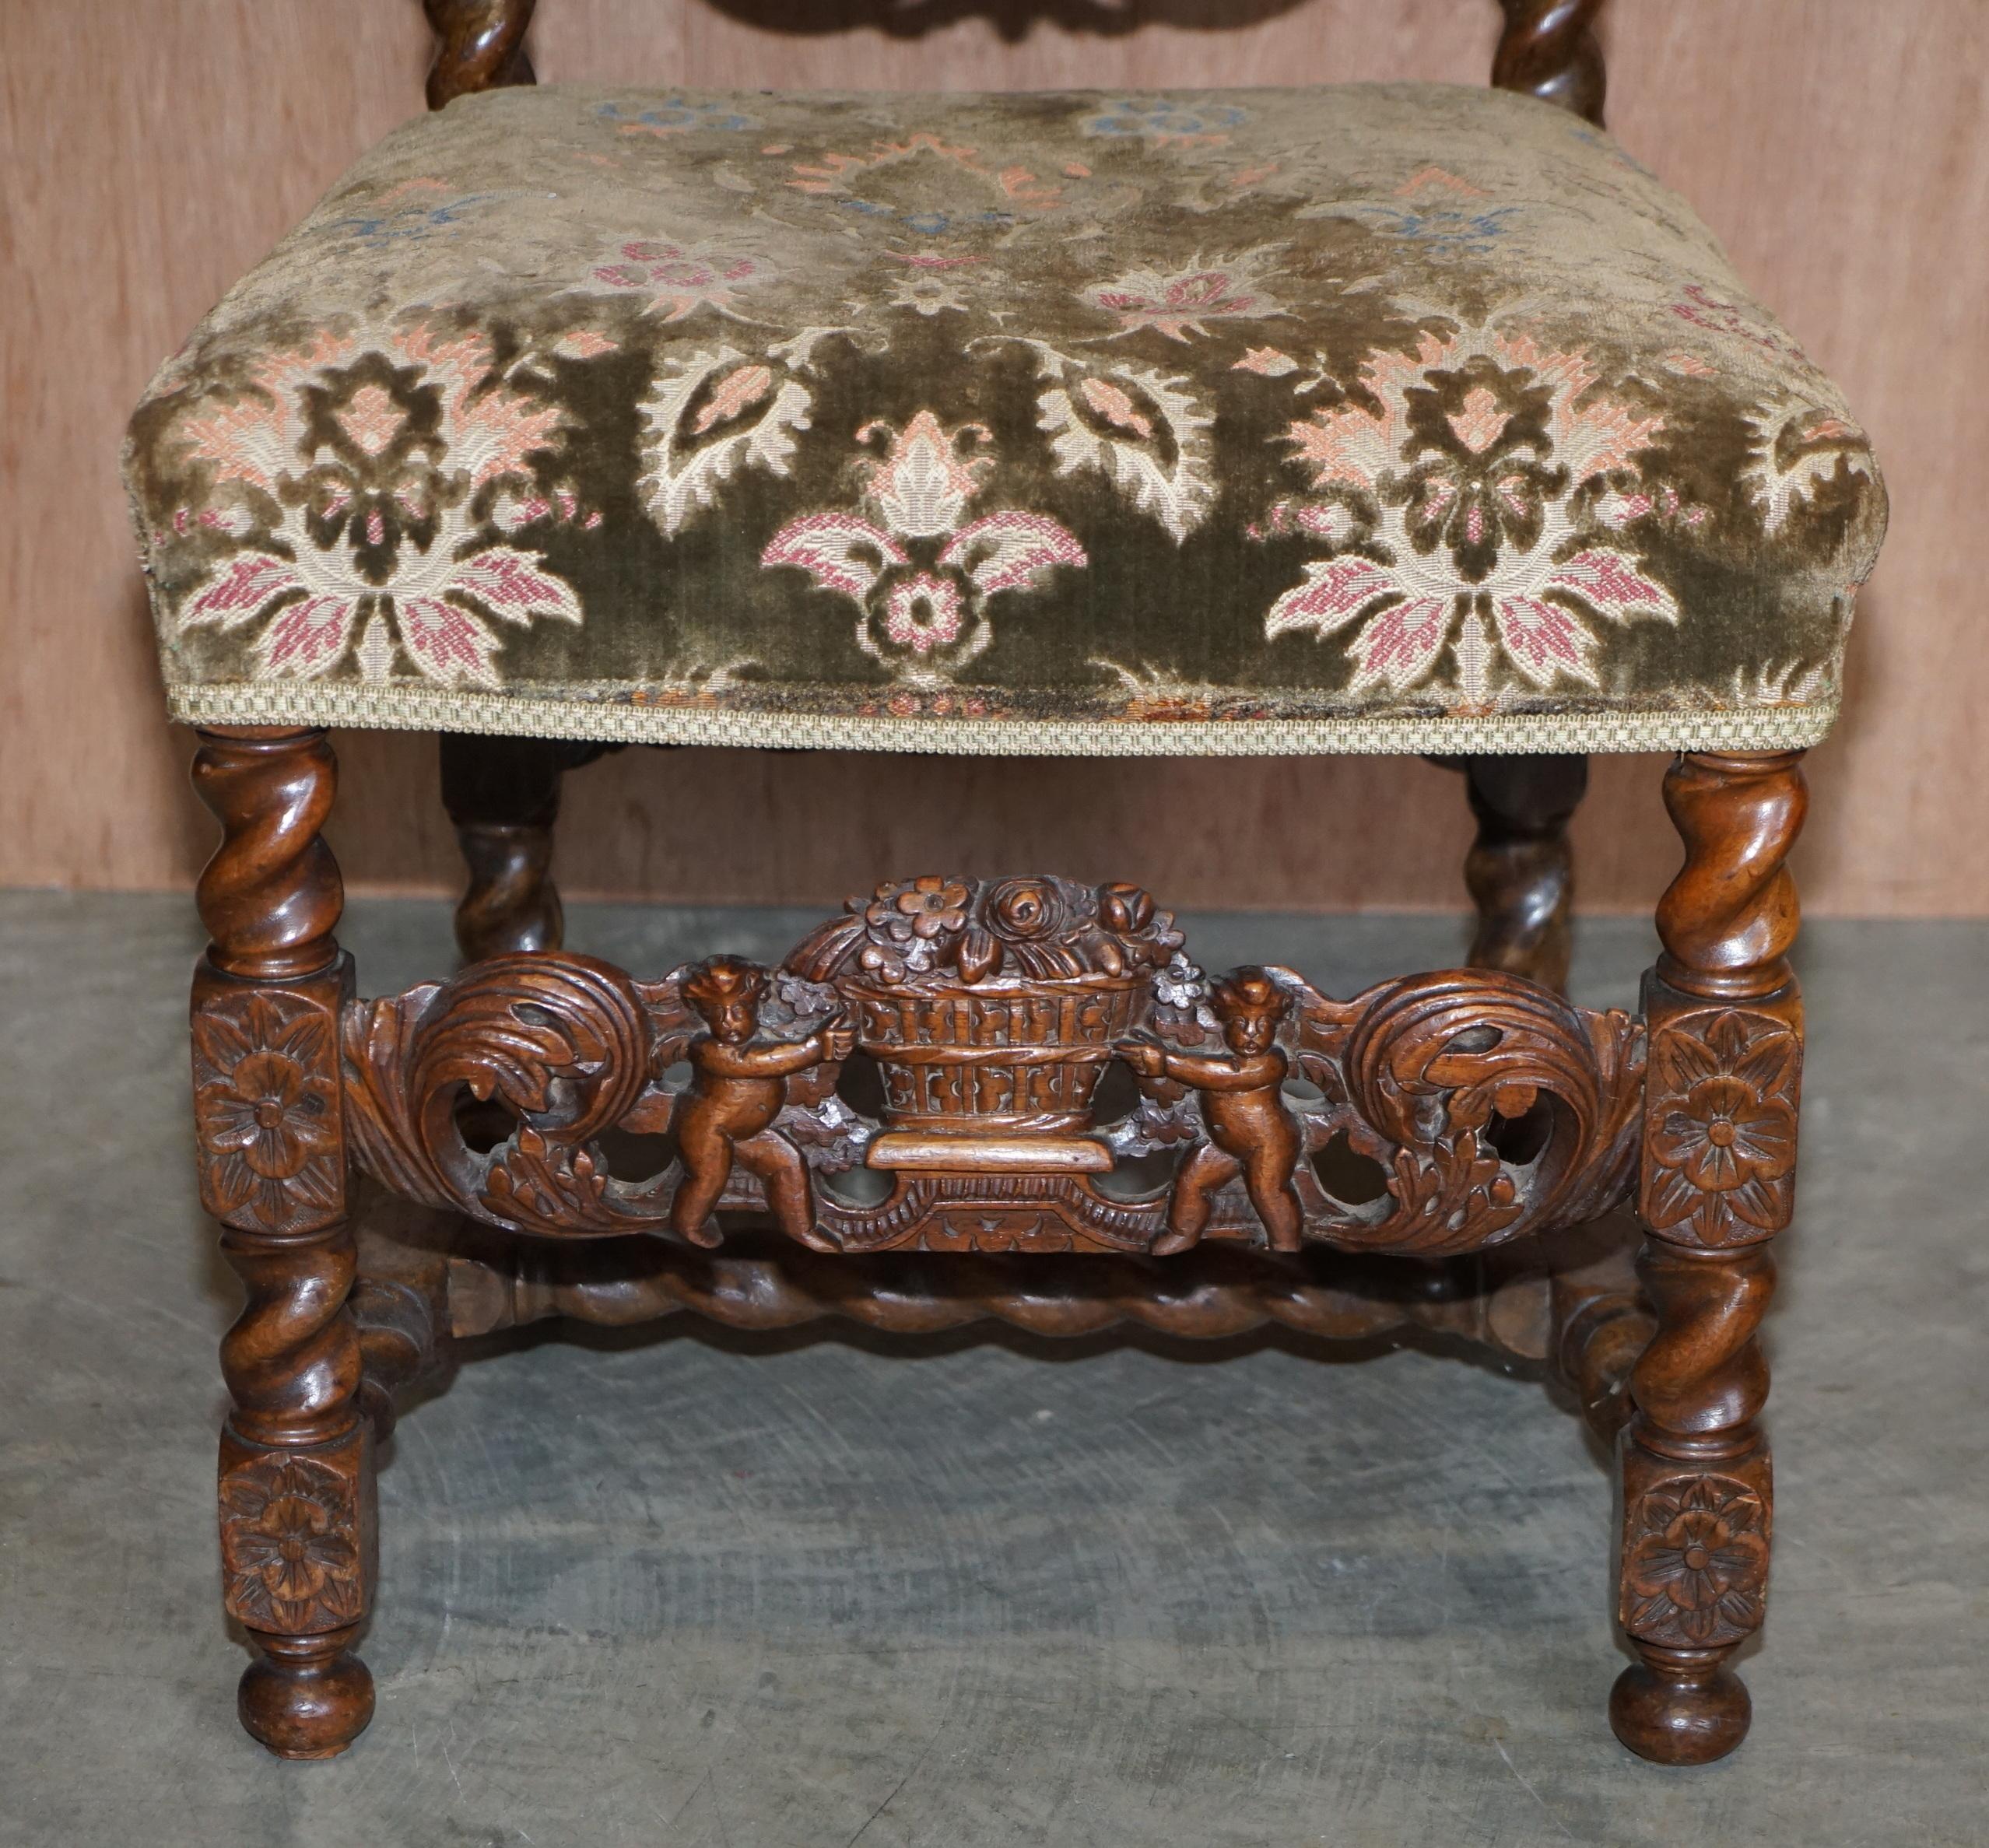 Pair of 18th Century Fruit Wood Carved Chair Cherubs Holding a Crown and Flowers For Sale 7